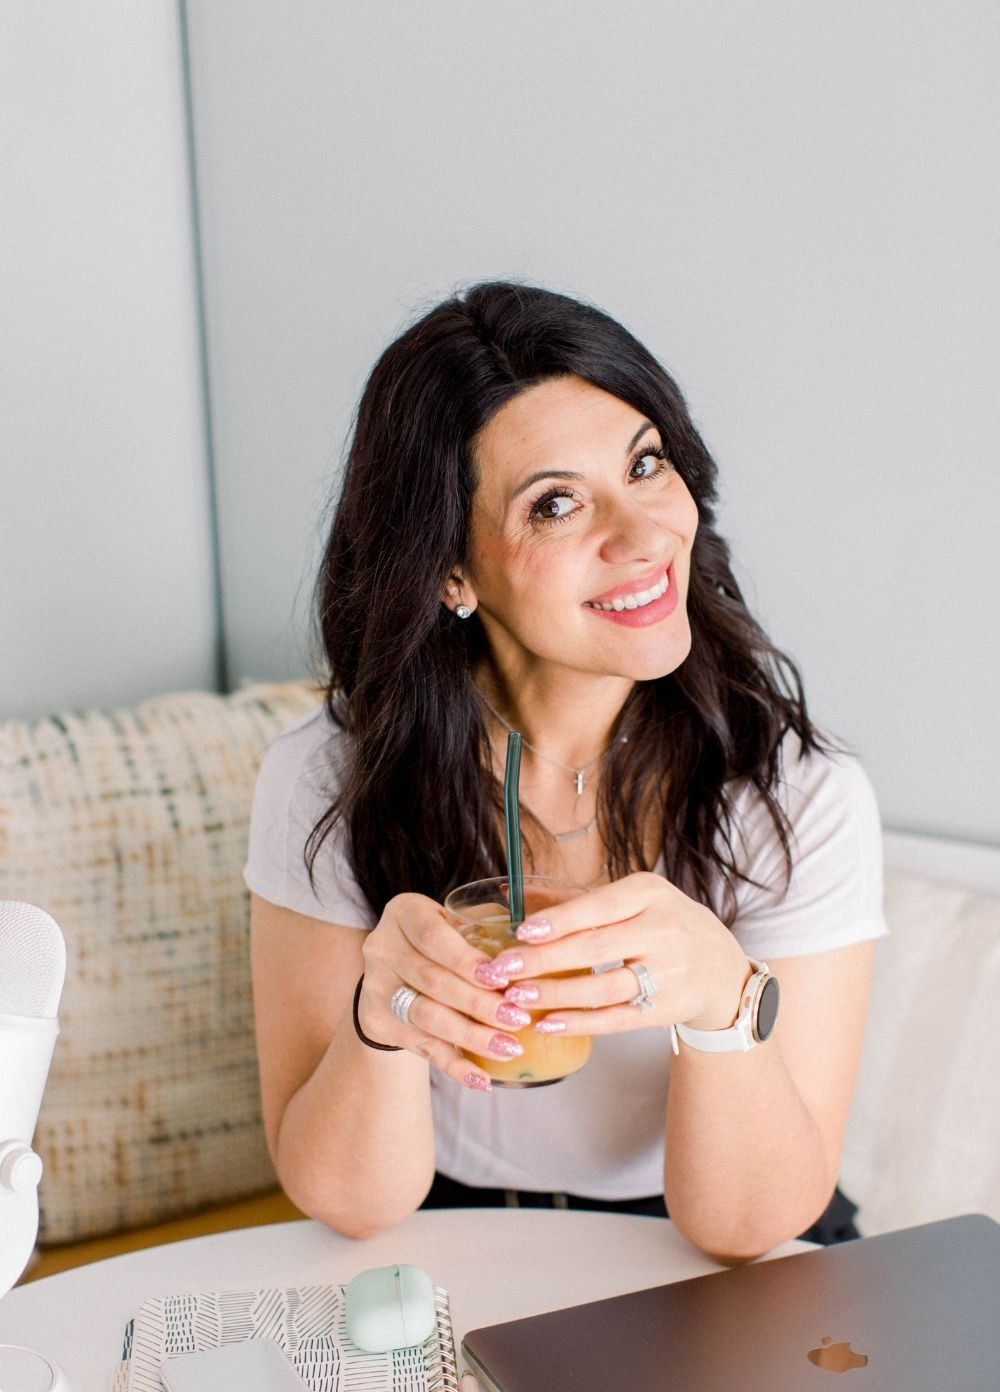 dark haired lady sitting on a sofa at a table with a closed laptop and phone, airpods, a notebook and a microphone. She is smiling into the camera with a glass of orange juice held in both hands